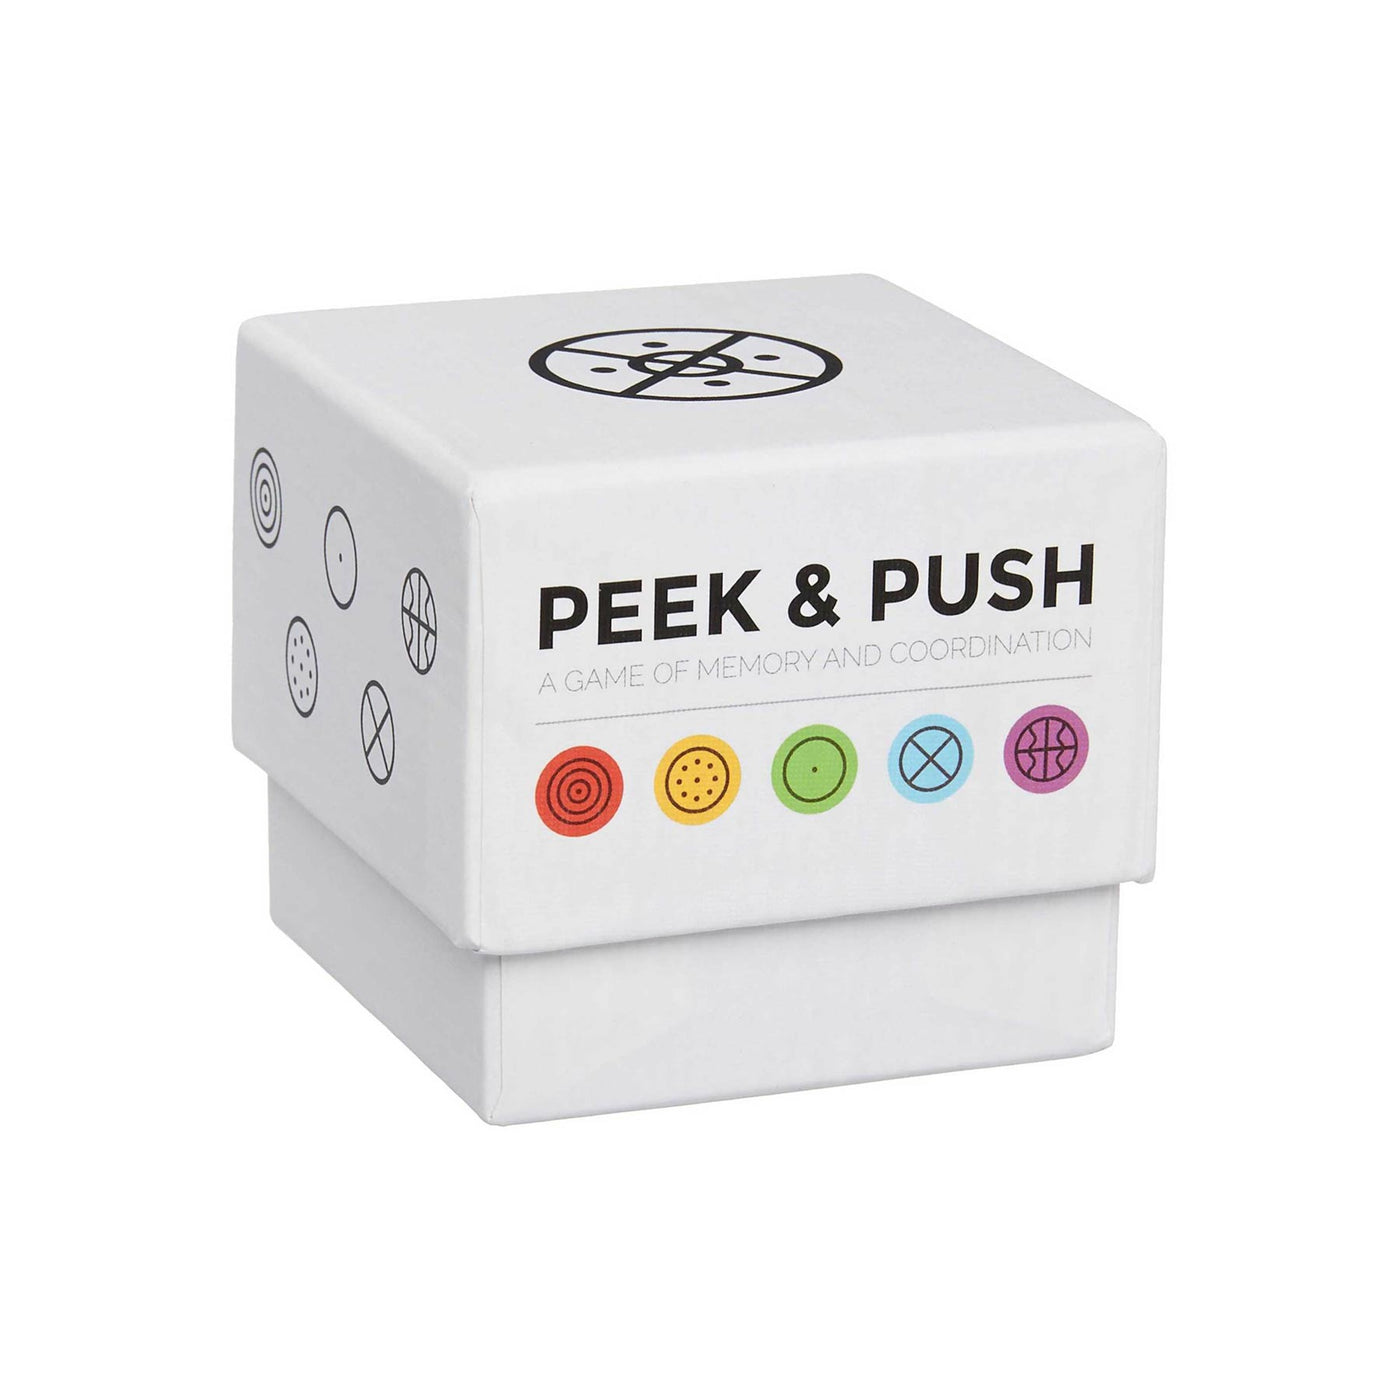 Front of Packaging for Peek and Push game